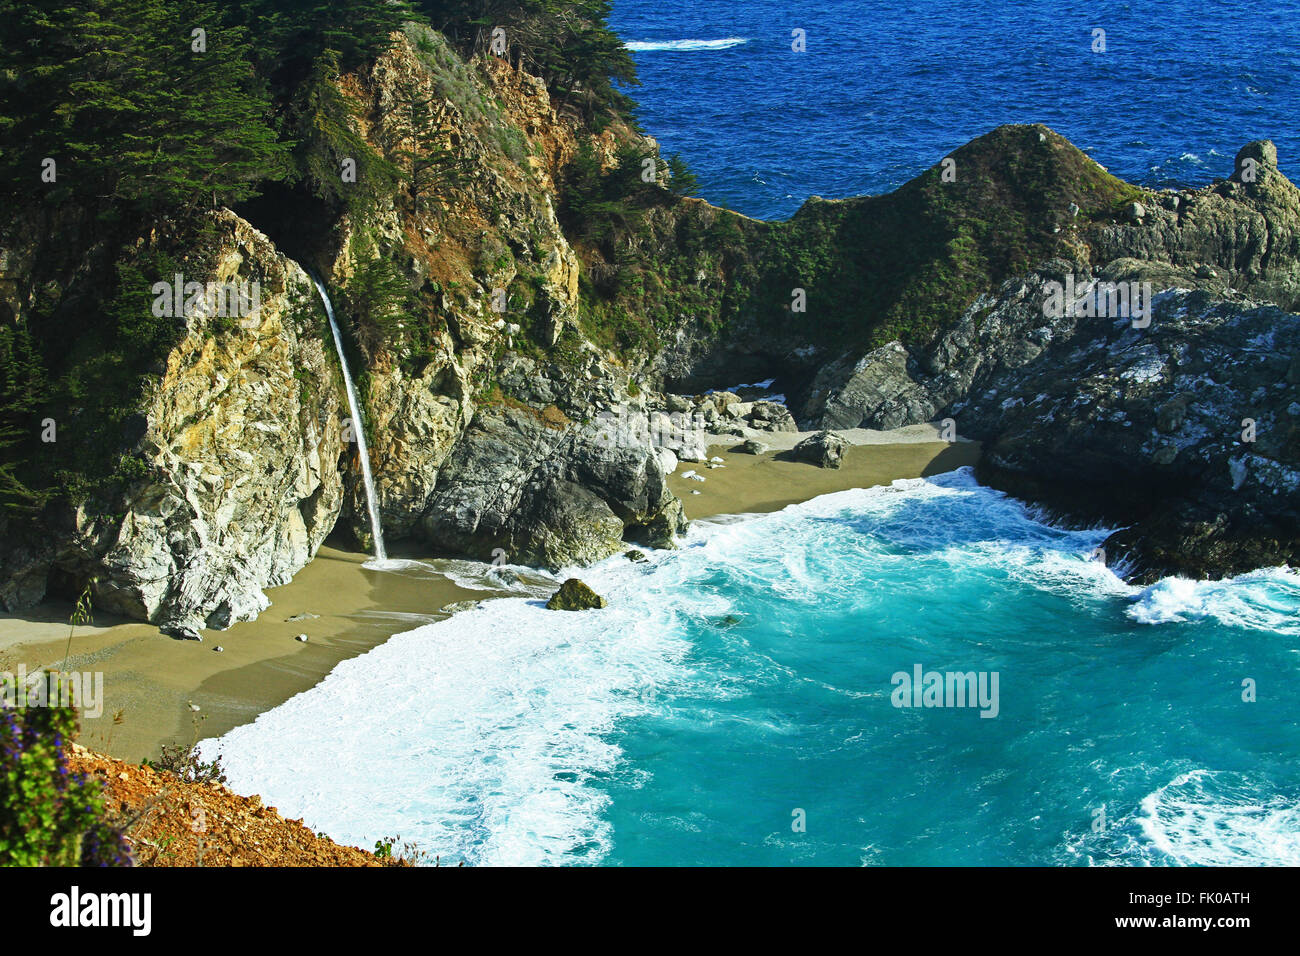 Mcway falls viewed from the overlook in Big Sur, California, at the Julia Pfeiffer Burns State Park Stock Photo